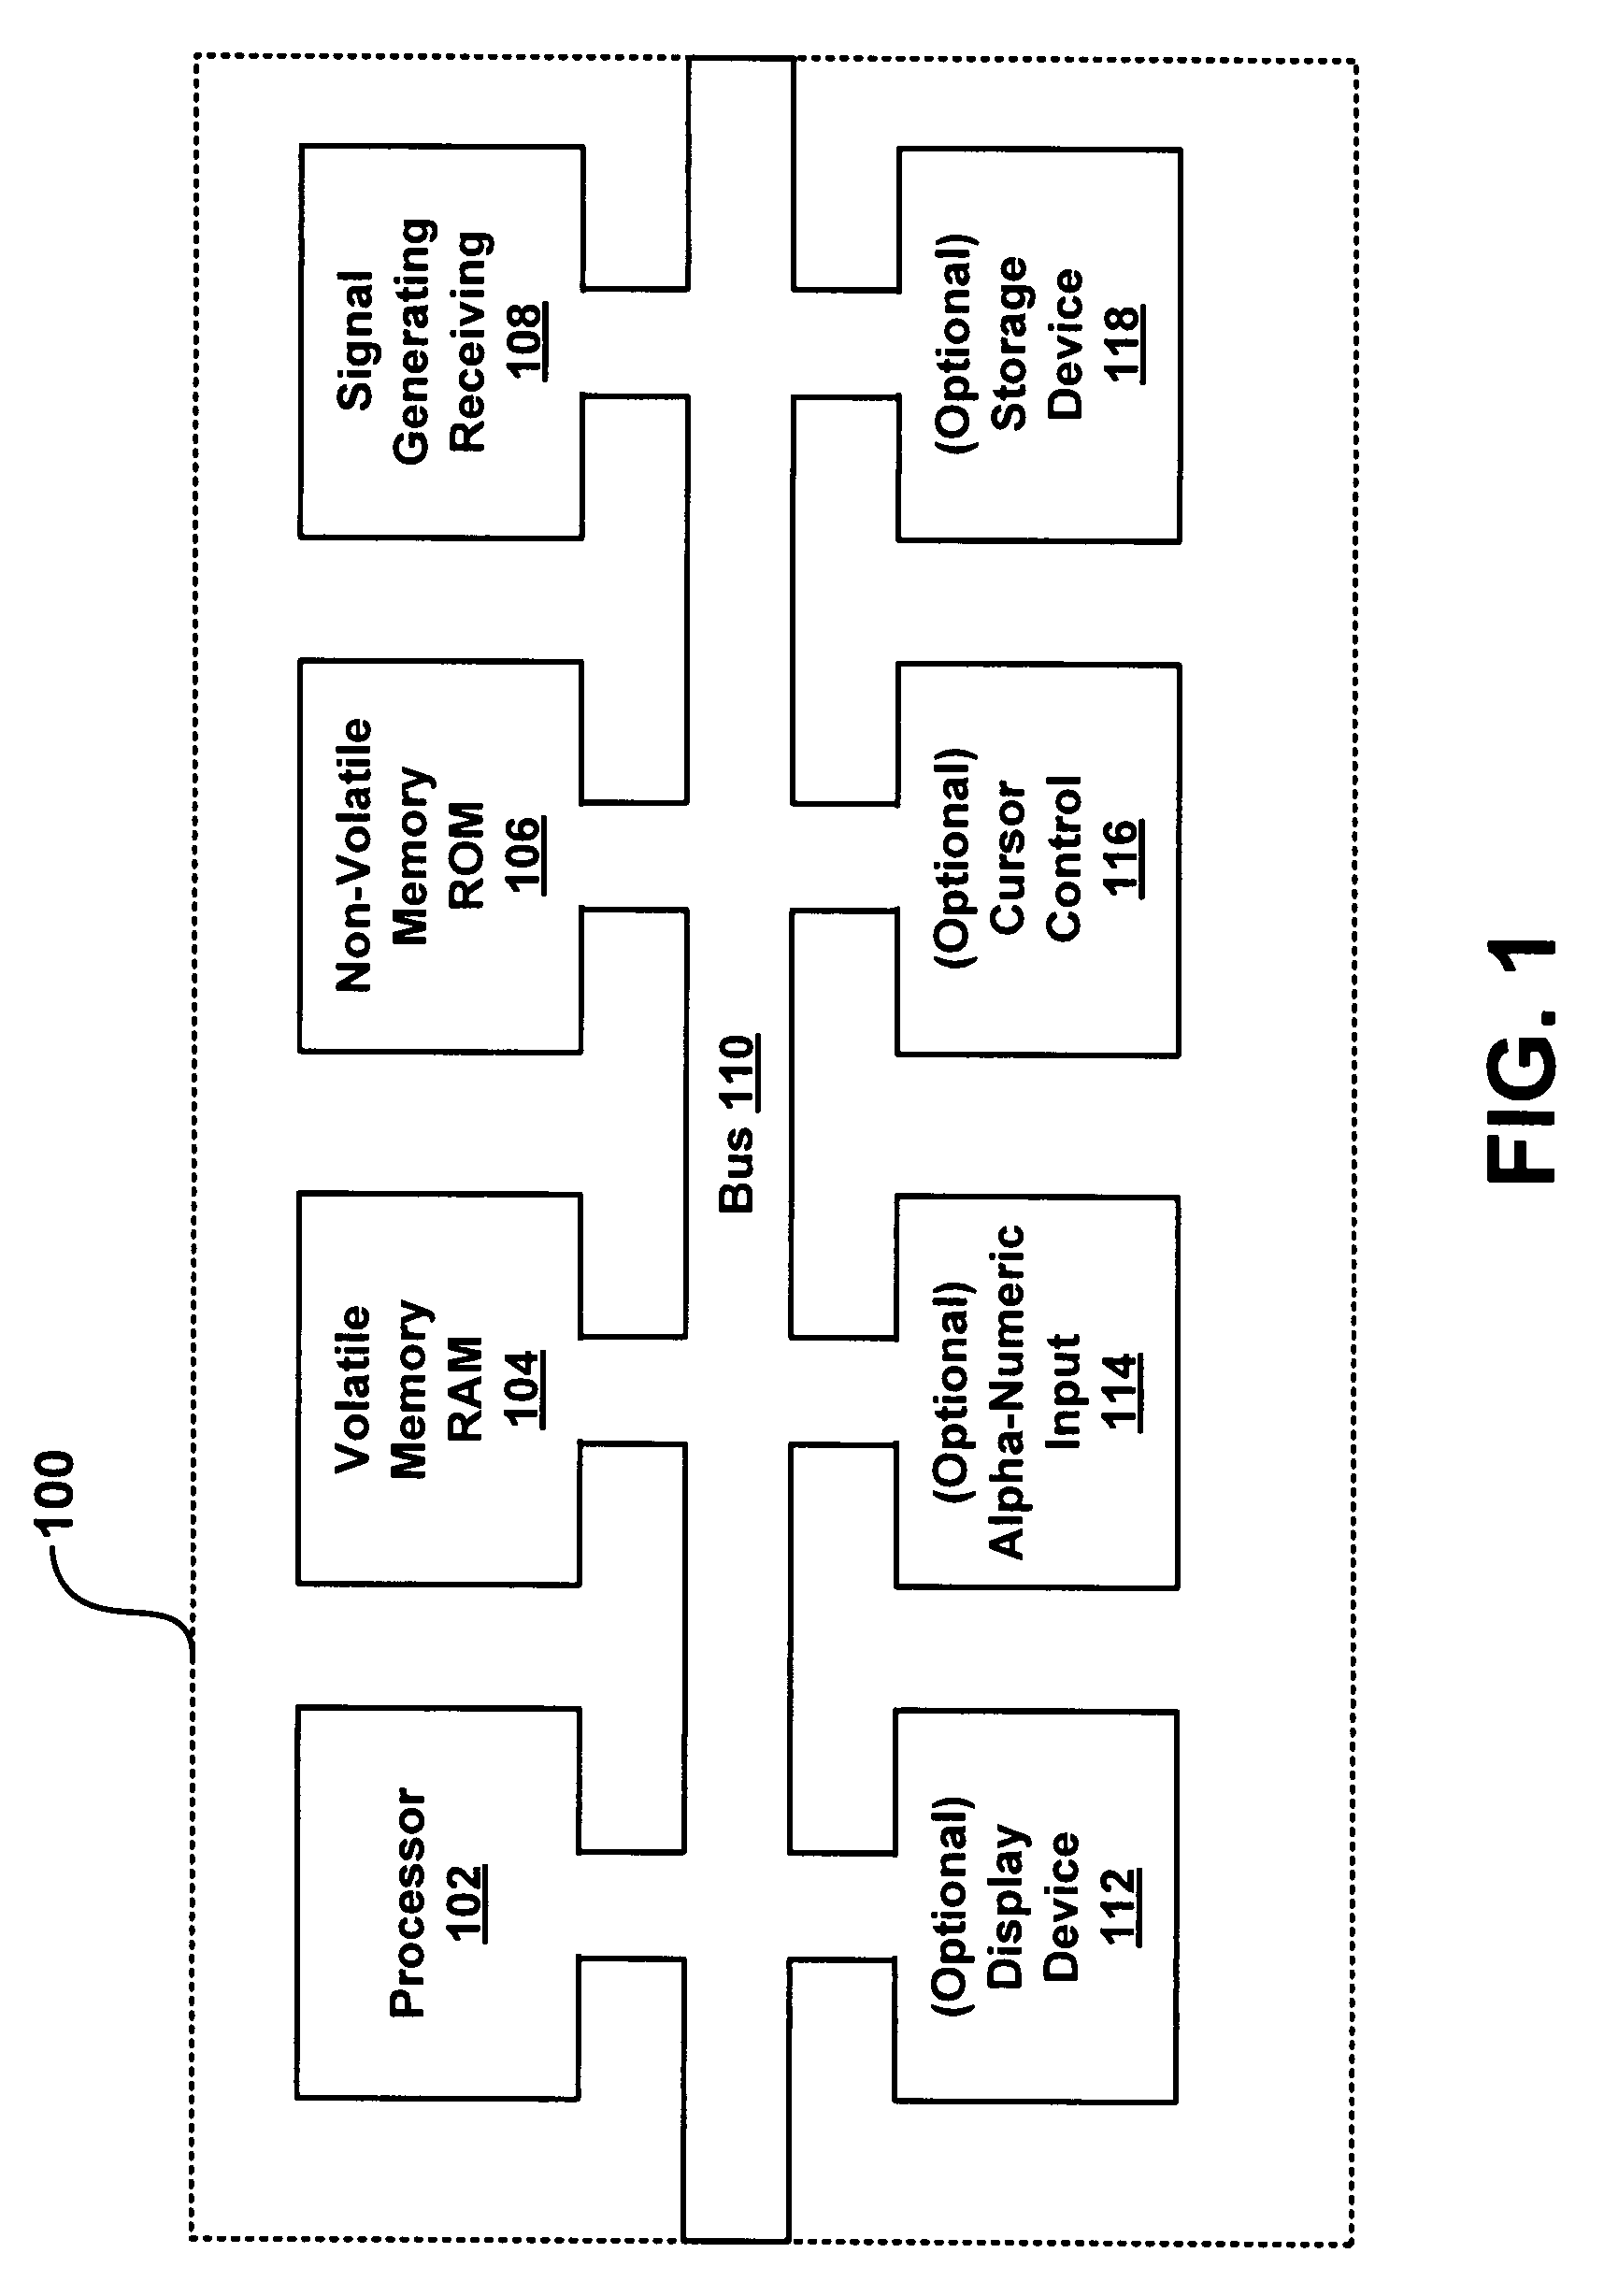 Method for providing maintenance to an asset